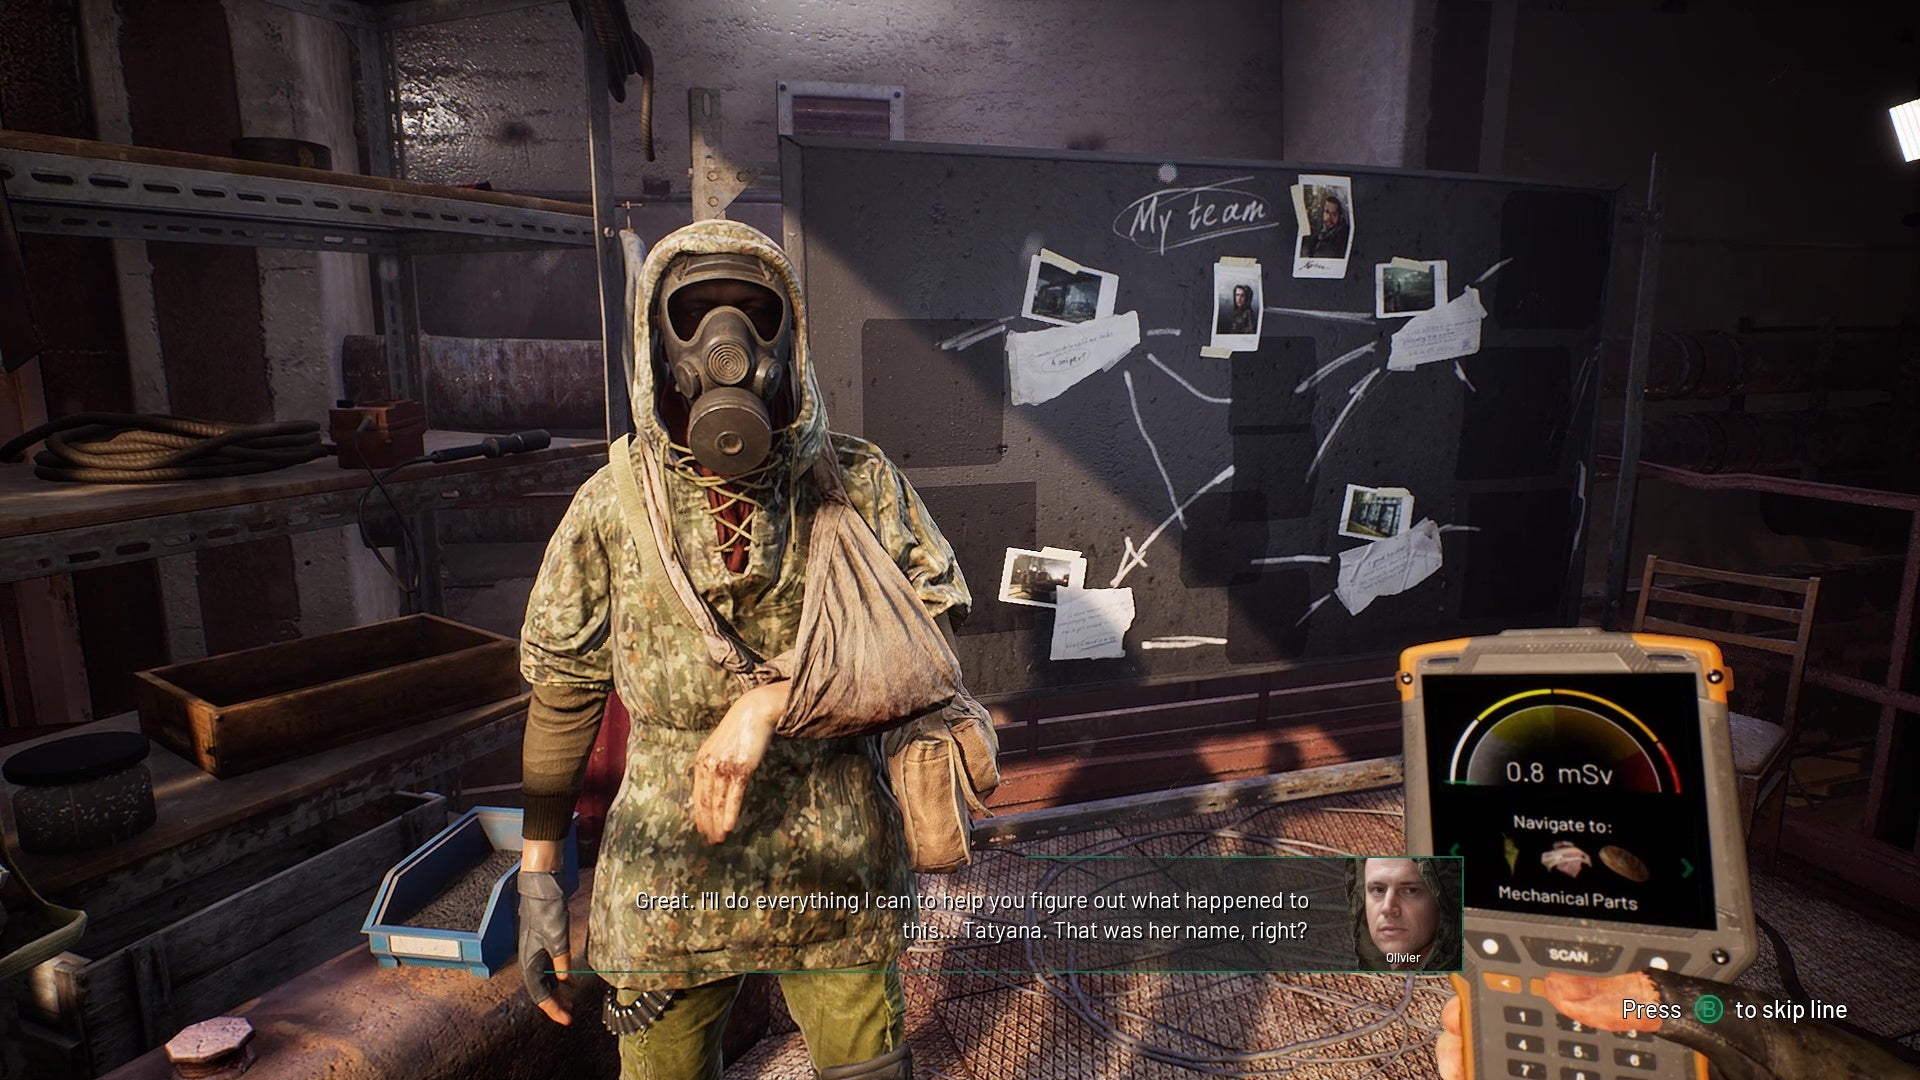 An image from Chernobylite which shows a character wearing a gas mask, and their arm in a sling, stood next to a board filled with clues and evidence.